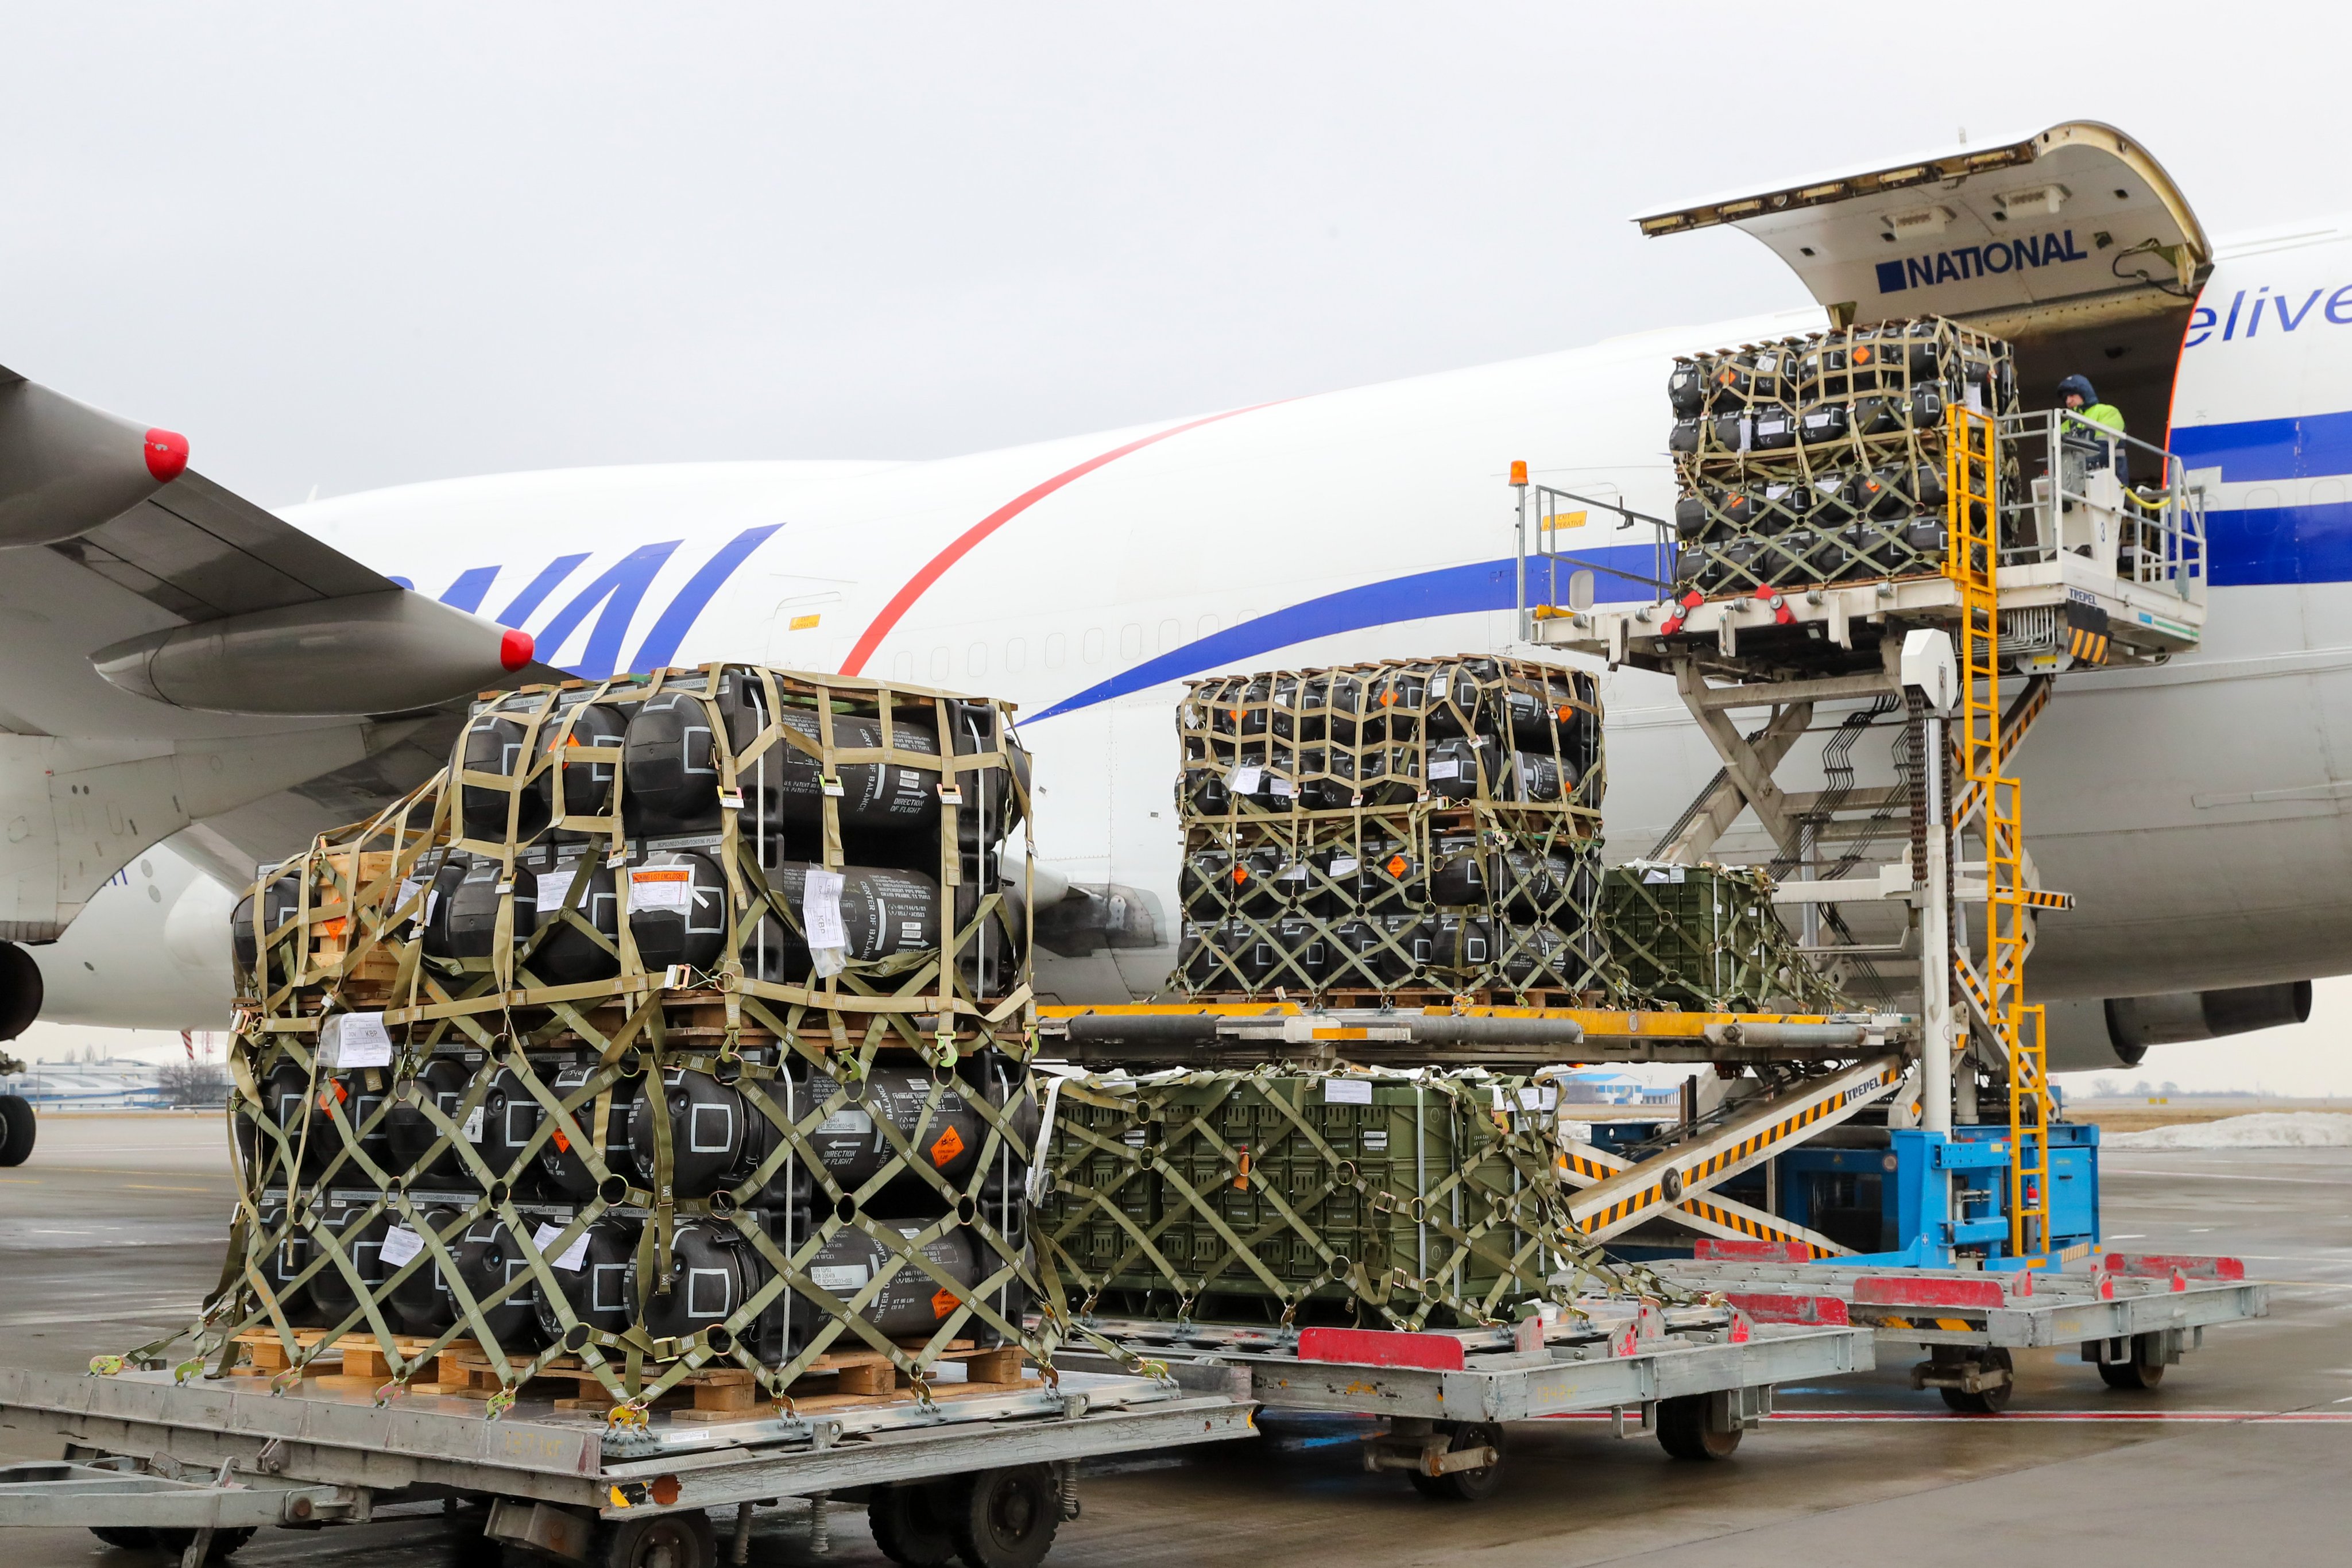 Fifteen flights of military shipment, including 90 tons of ammunition and Javelin missile systems for Ukraine armed forces arrive in Ukraine on February 11.